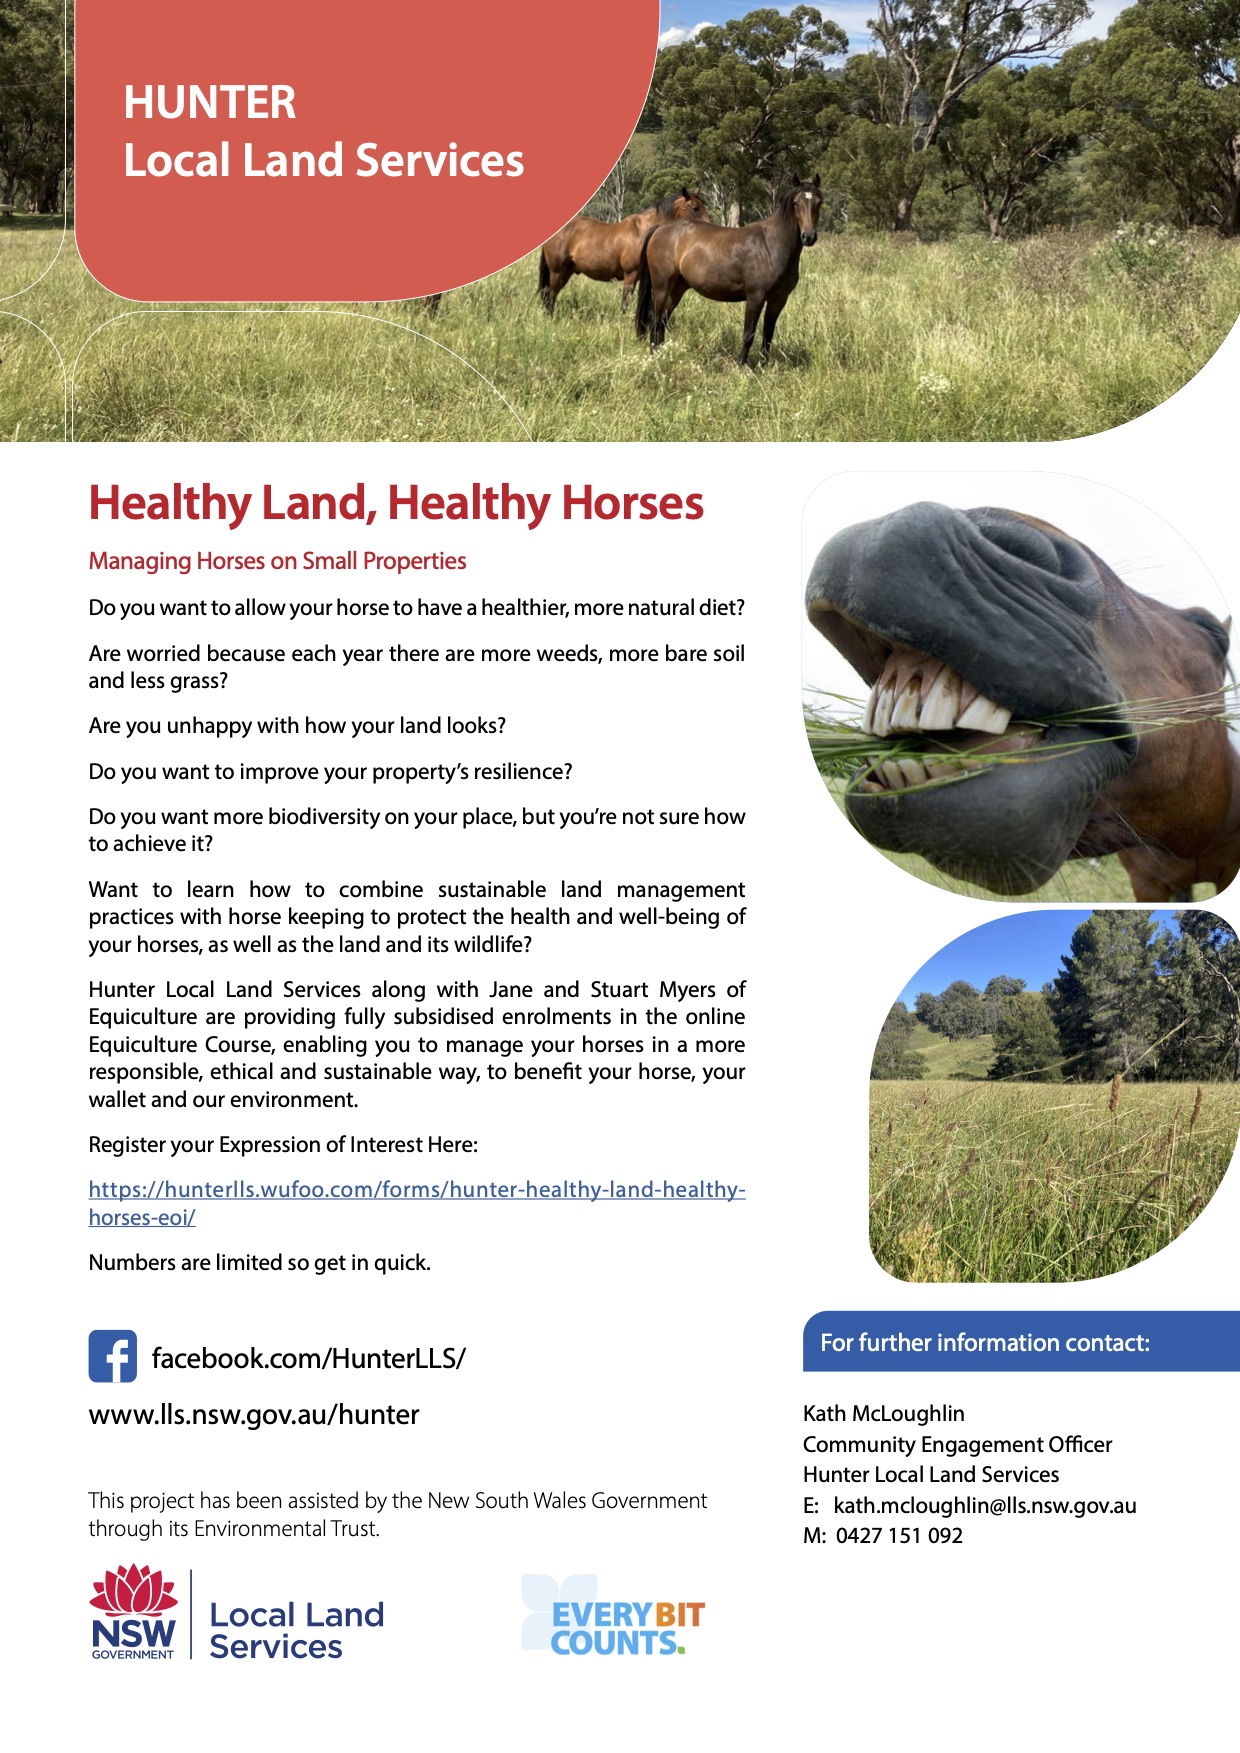 HR03782- Every Bit Counts- Healthy Land, Healthy Horses - Equiculture Flyer